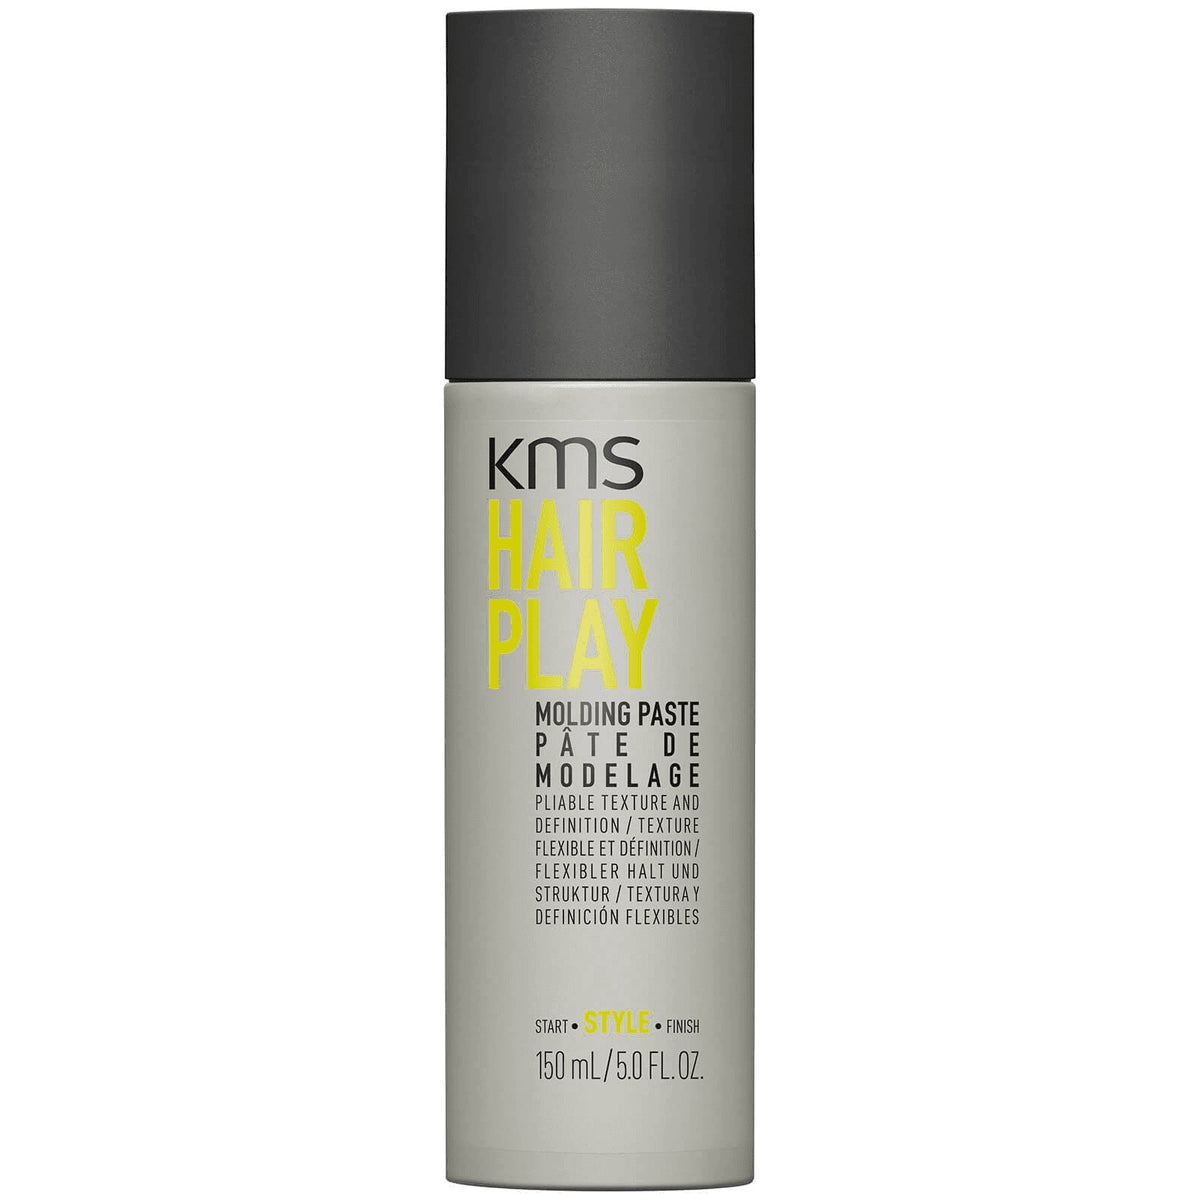 KMS Hairplay Molding Paste - Blend Box